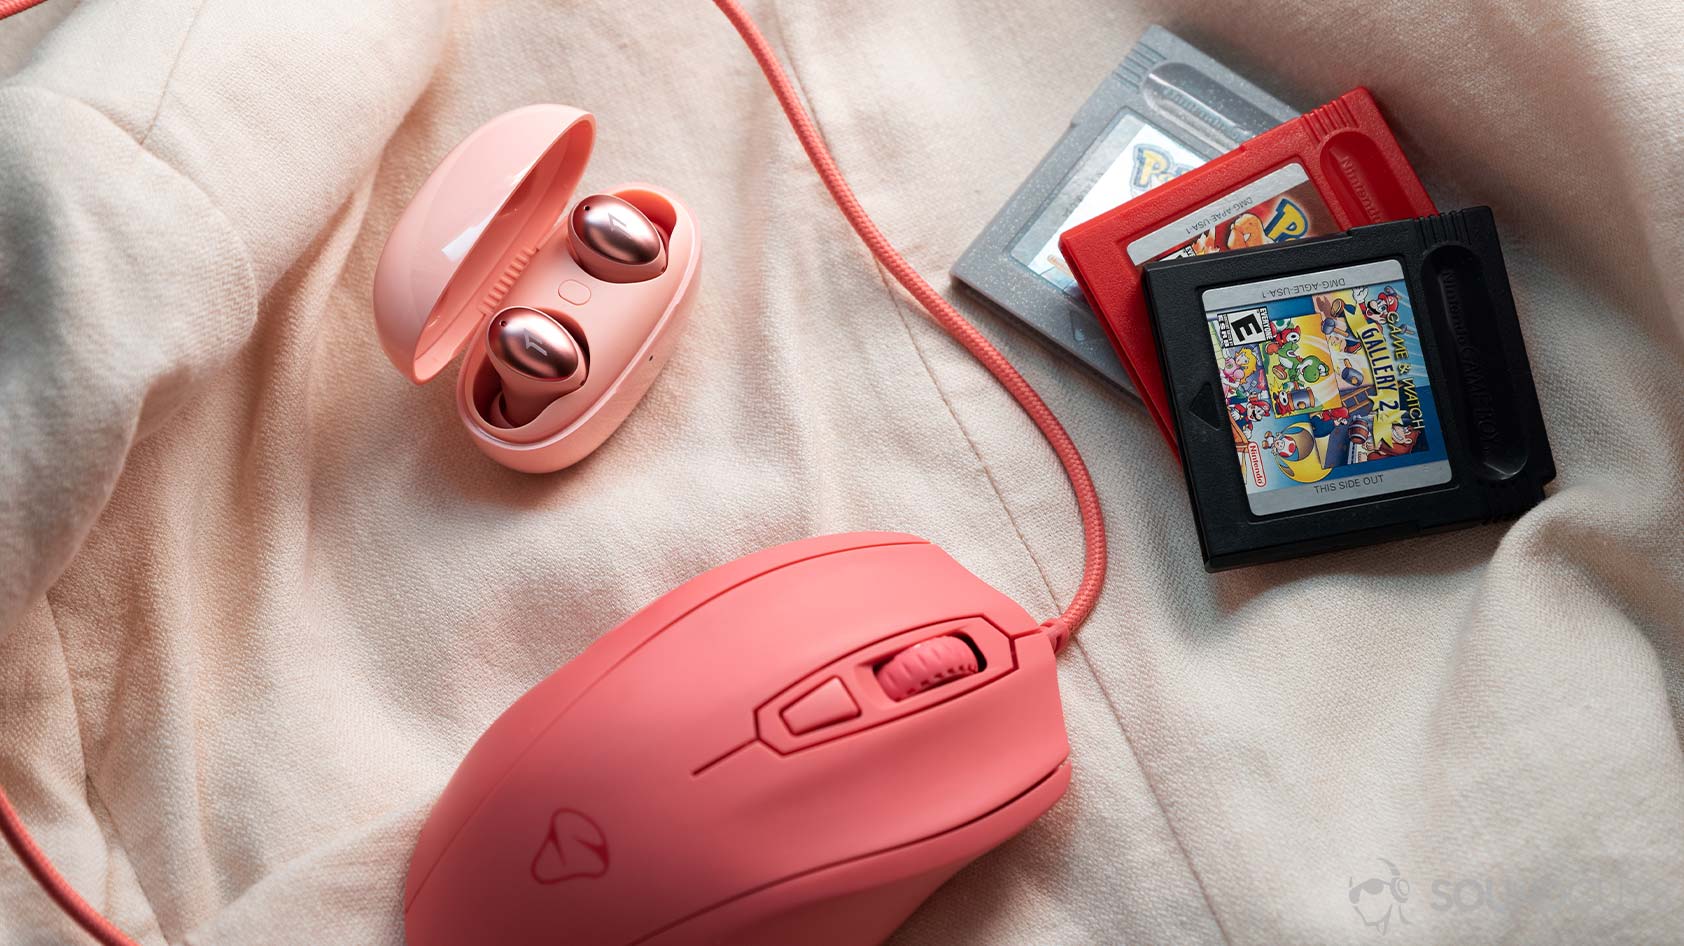 The 1MORE ColorBuds true wireless earbuds next to a pink wired mouse and set of three GameBoy game cartridges.